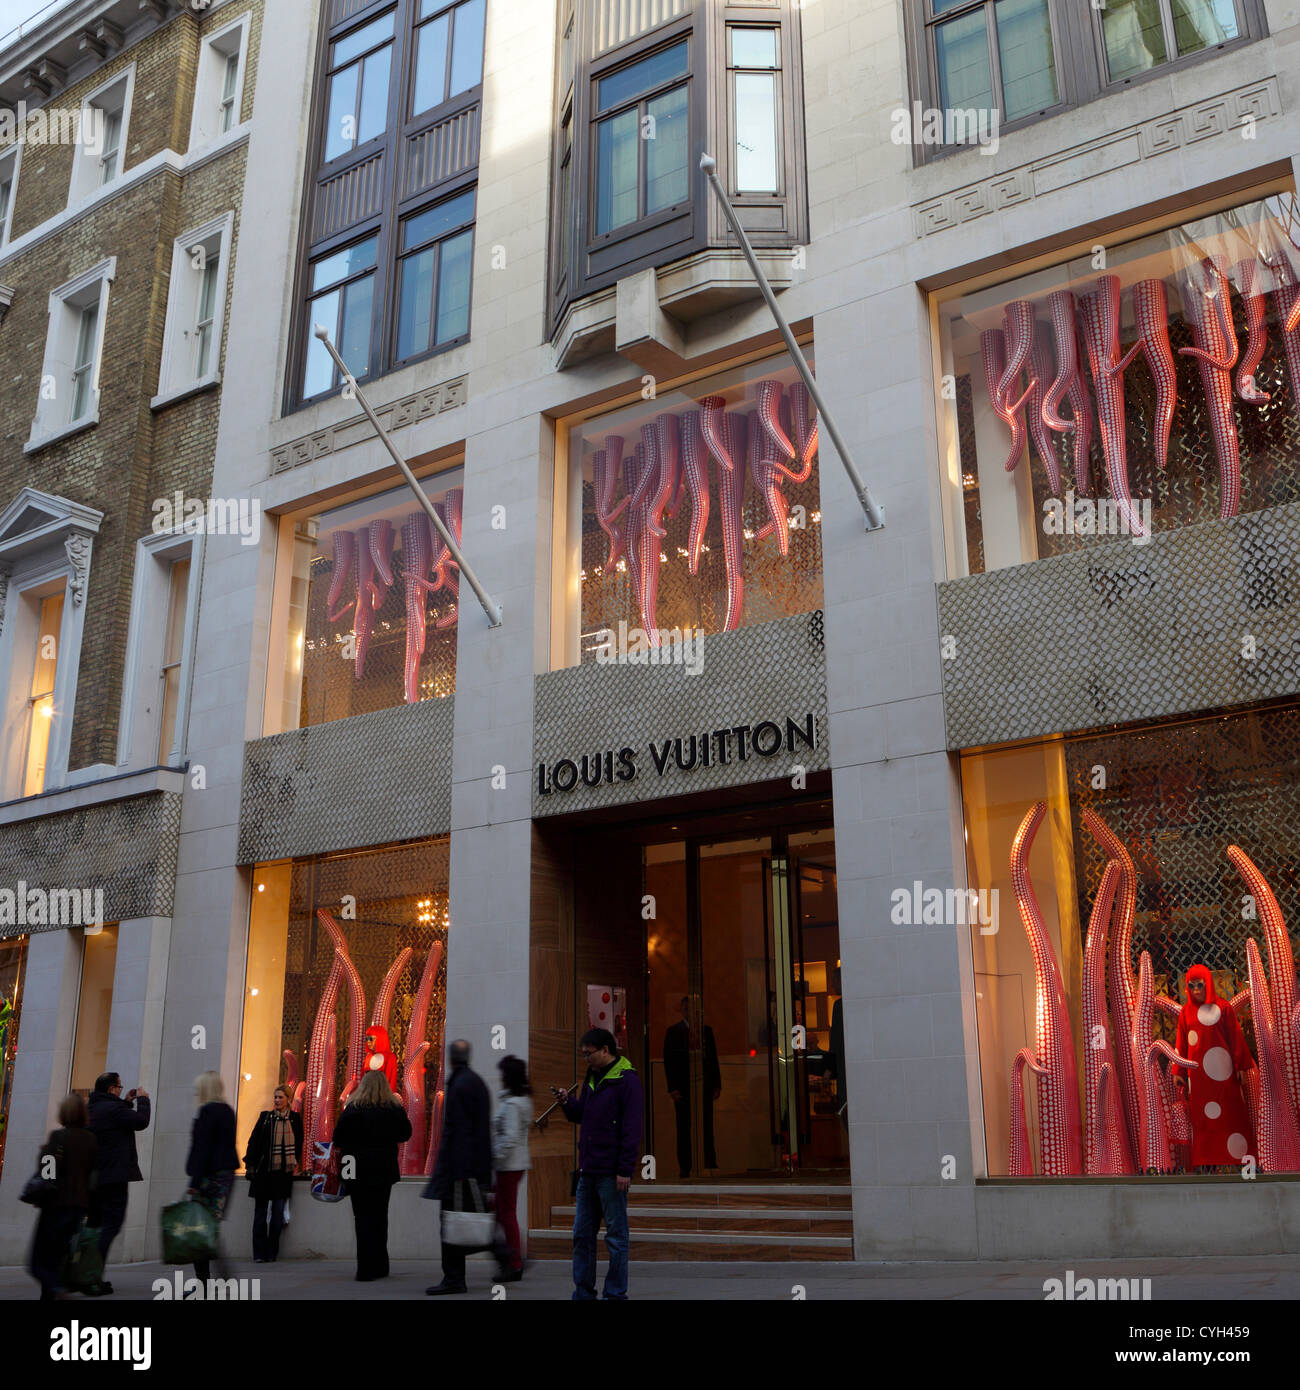 Front facade of Louis Vuitton Flagship store in New Bond Street